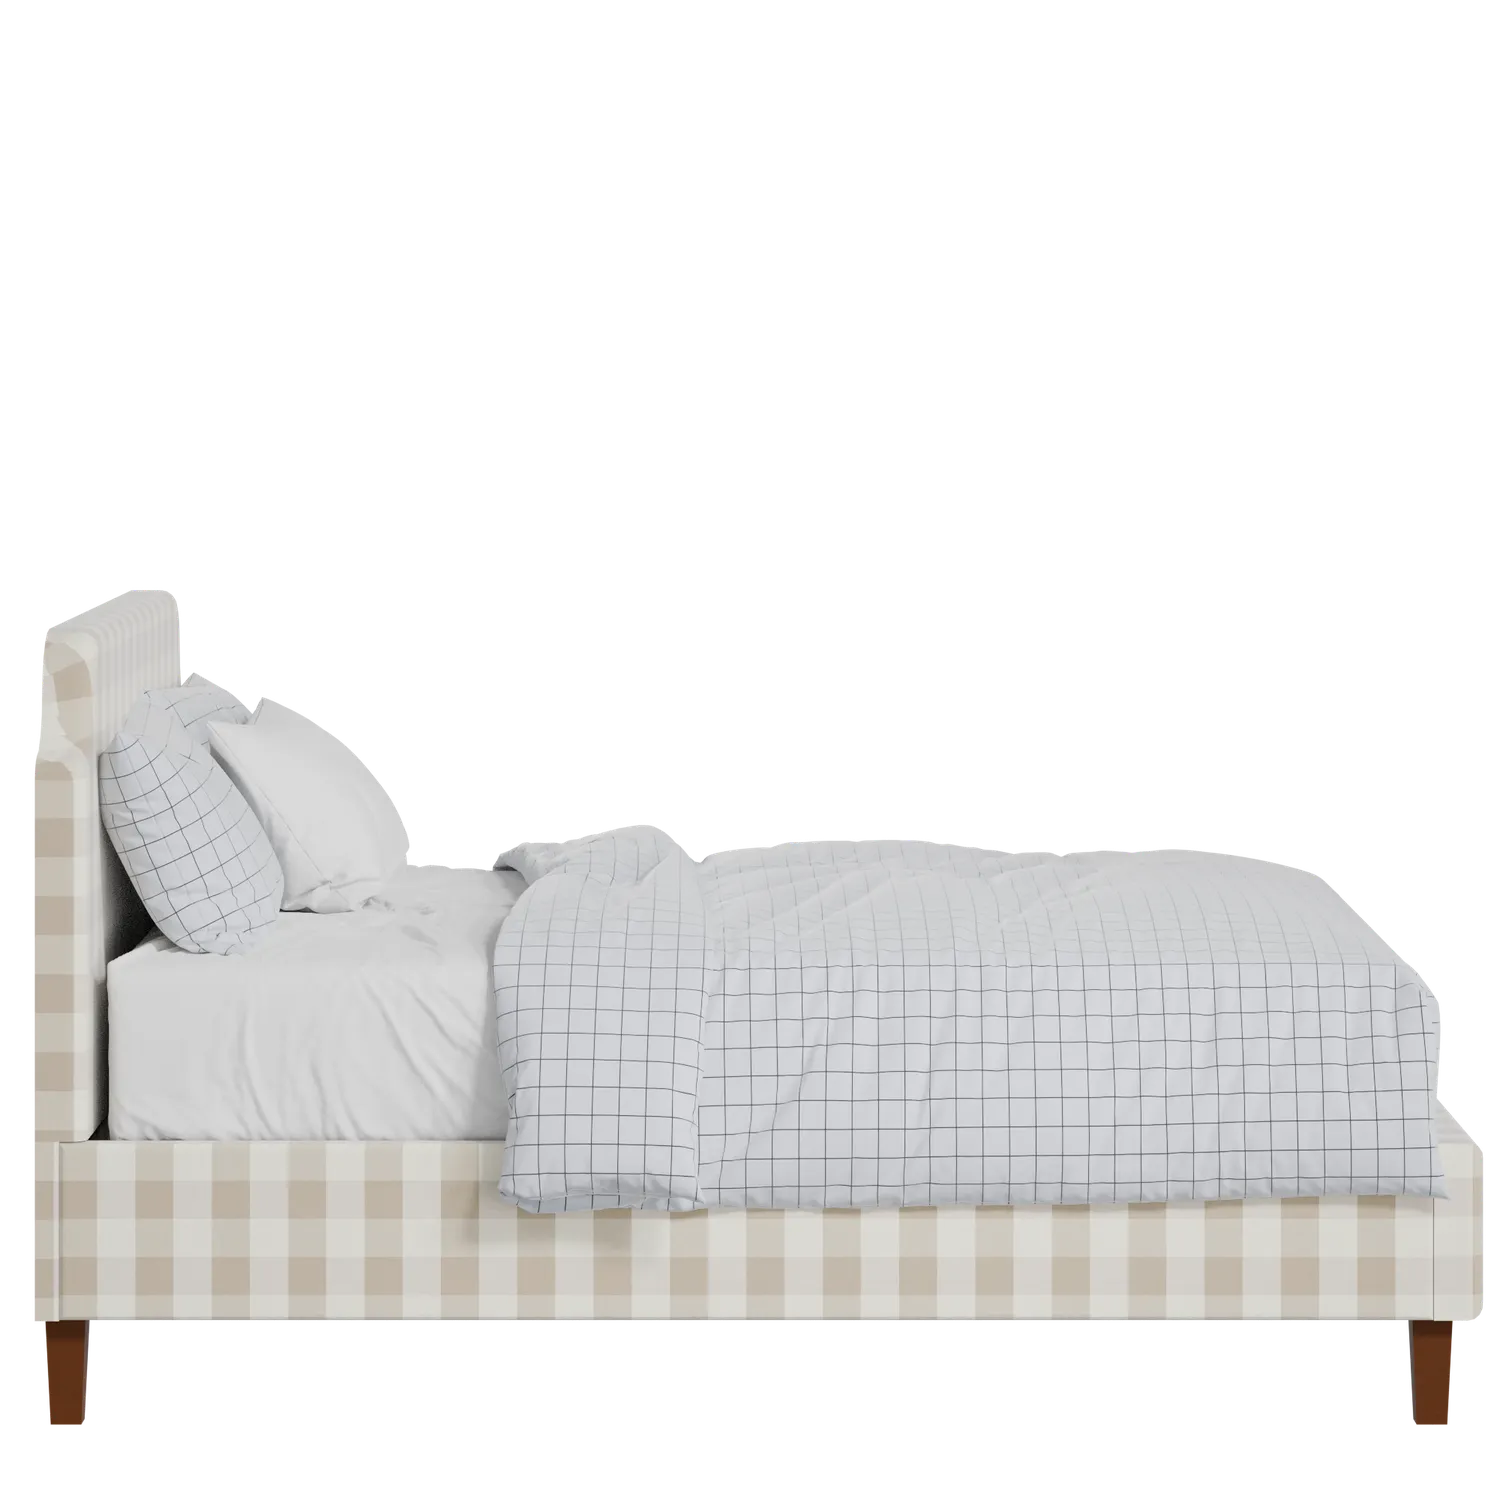 Charing Slim upholstered bed in Romo Kemble Putty fabric with Juno mattress